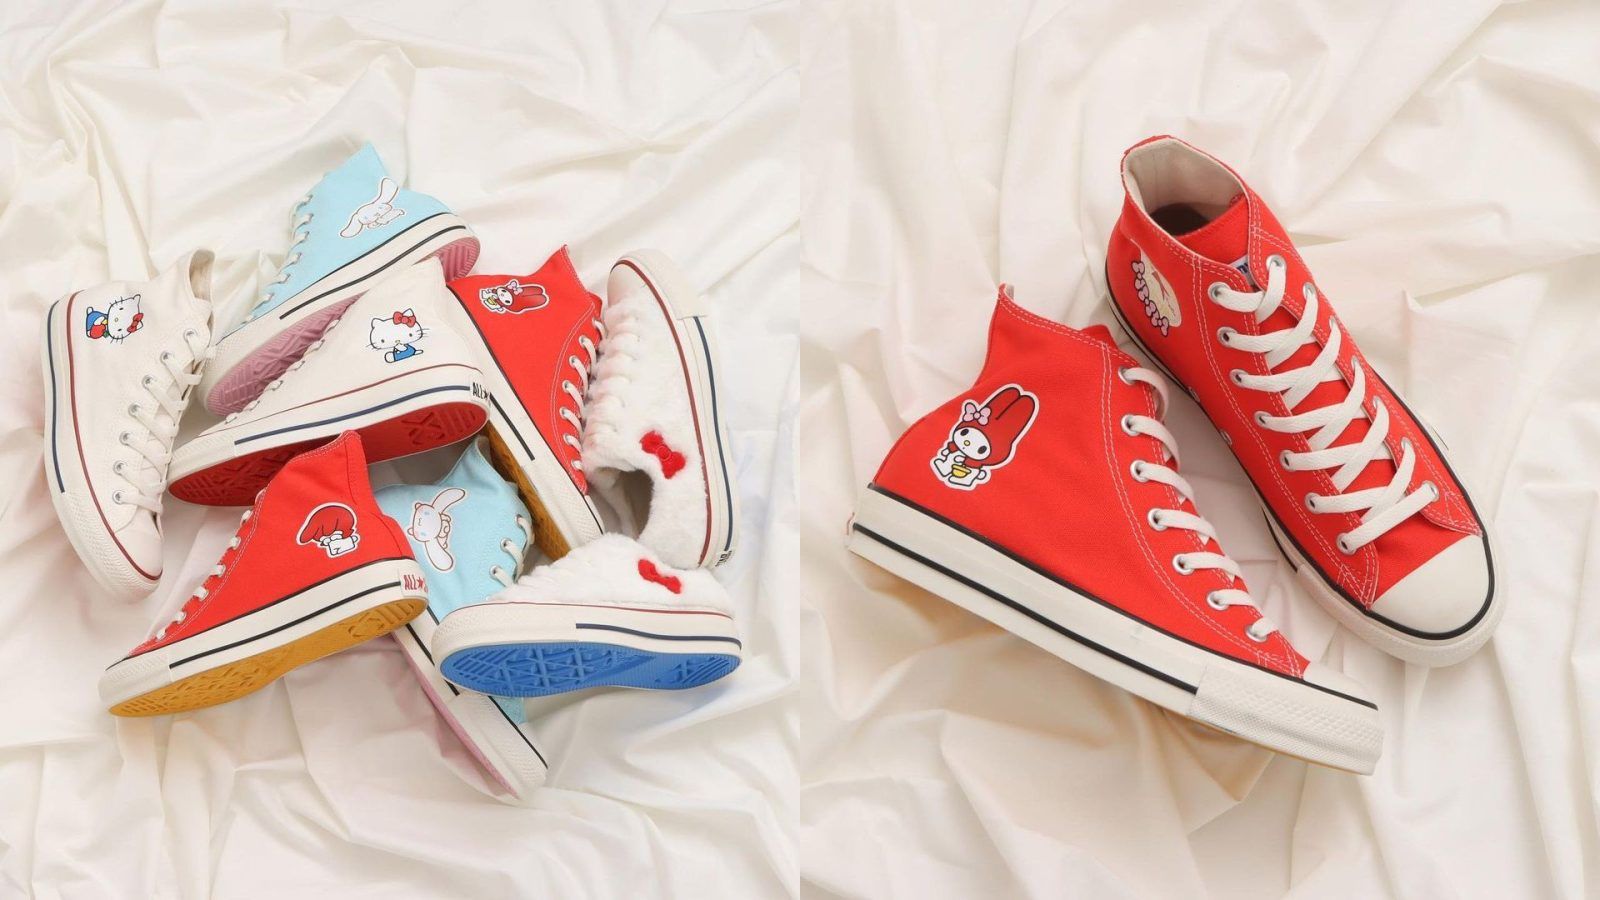 This Converse x Hello Kitty Line Is Everything